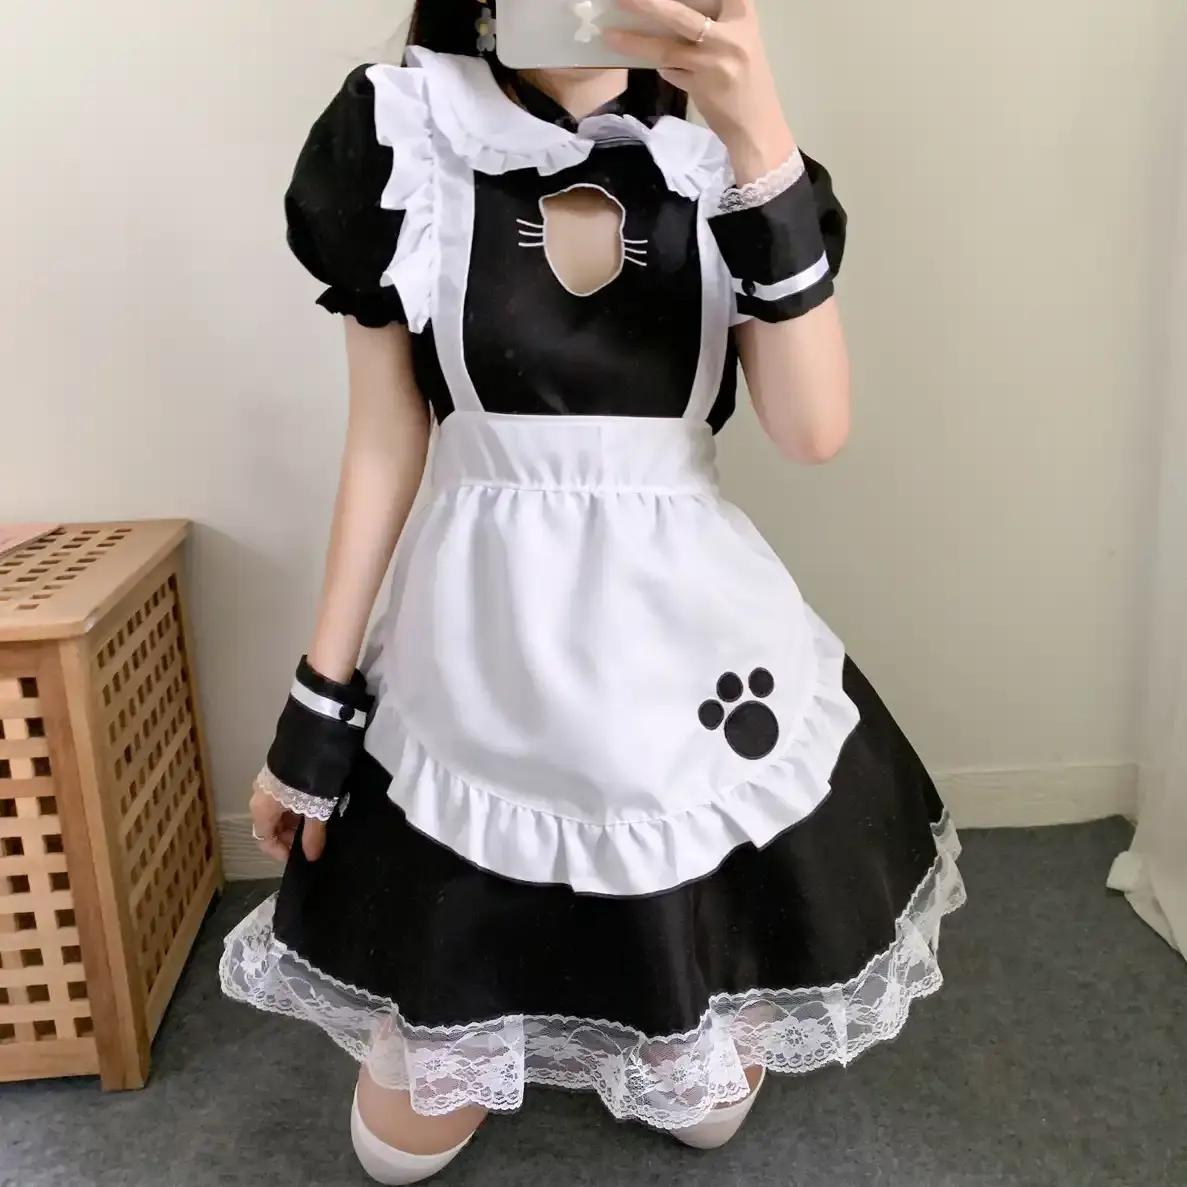 Sexy Black Cat Girl Women Fantasy French Maid Outfit Men Gothic Sweet Lolita Dress Anime Cosplay Costume Plus Size